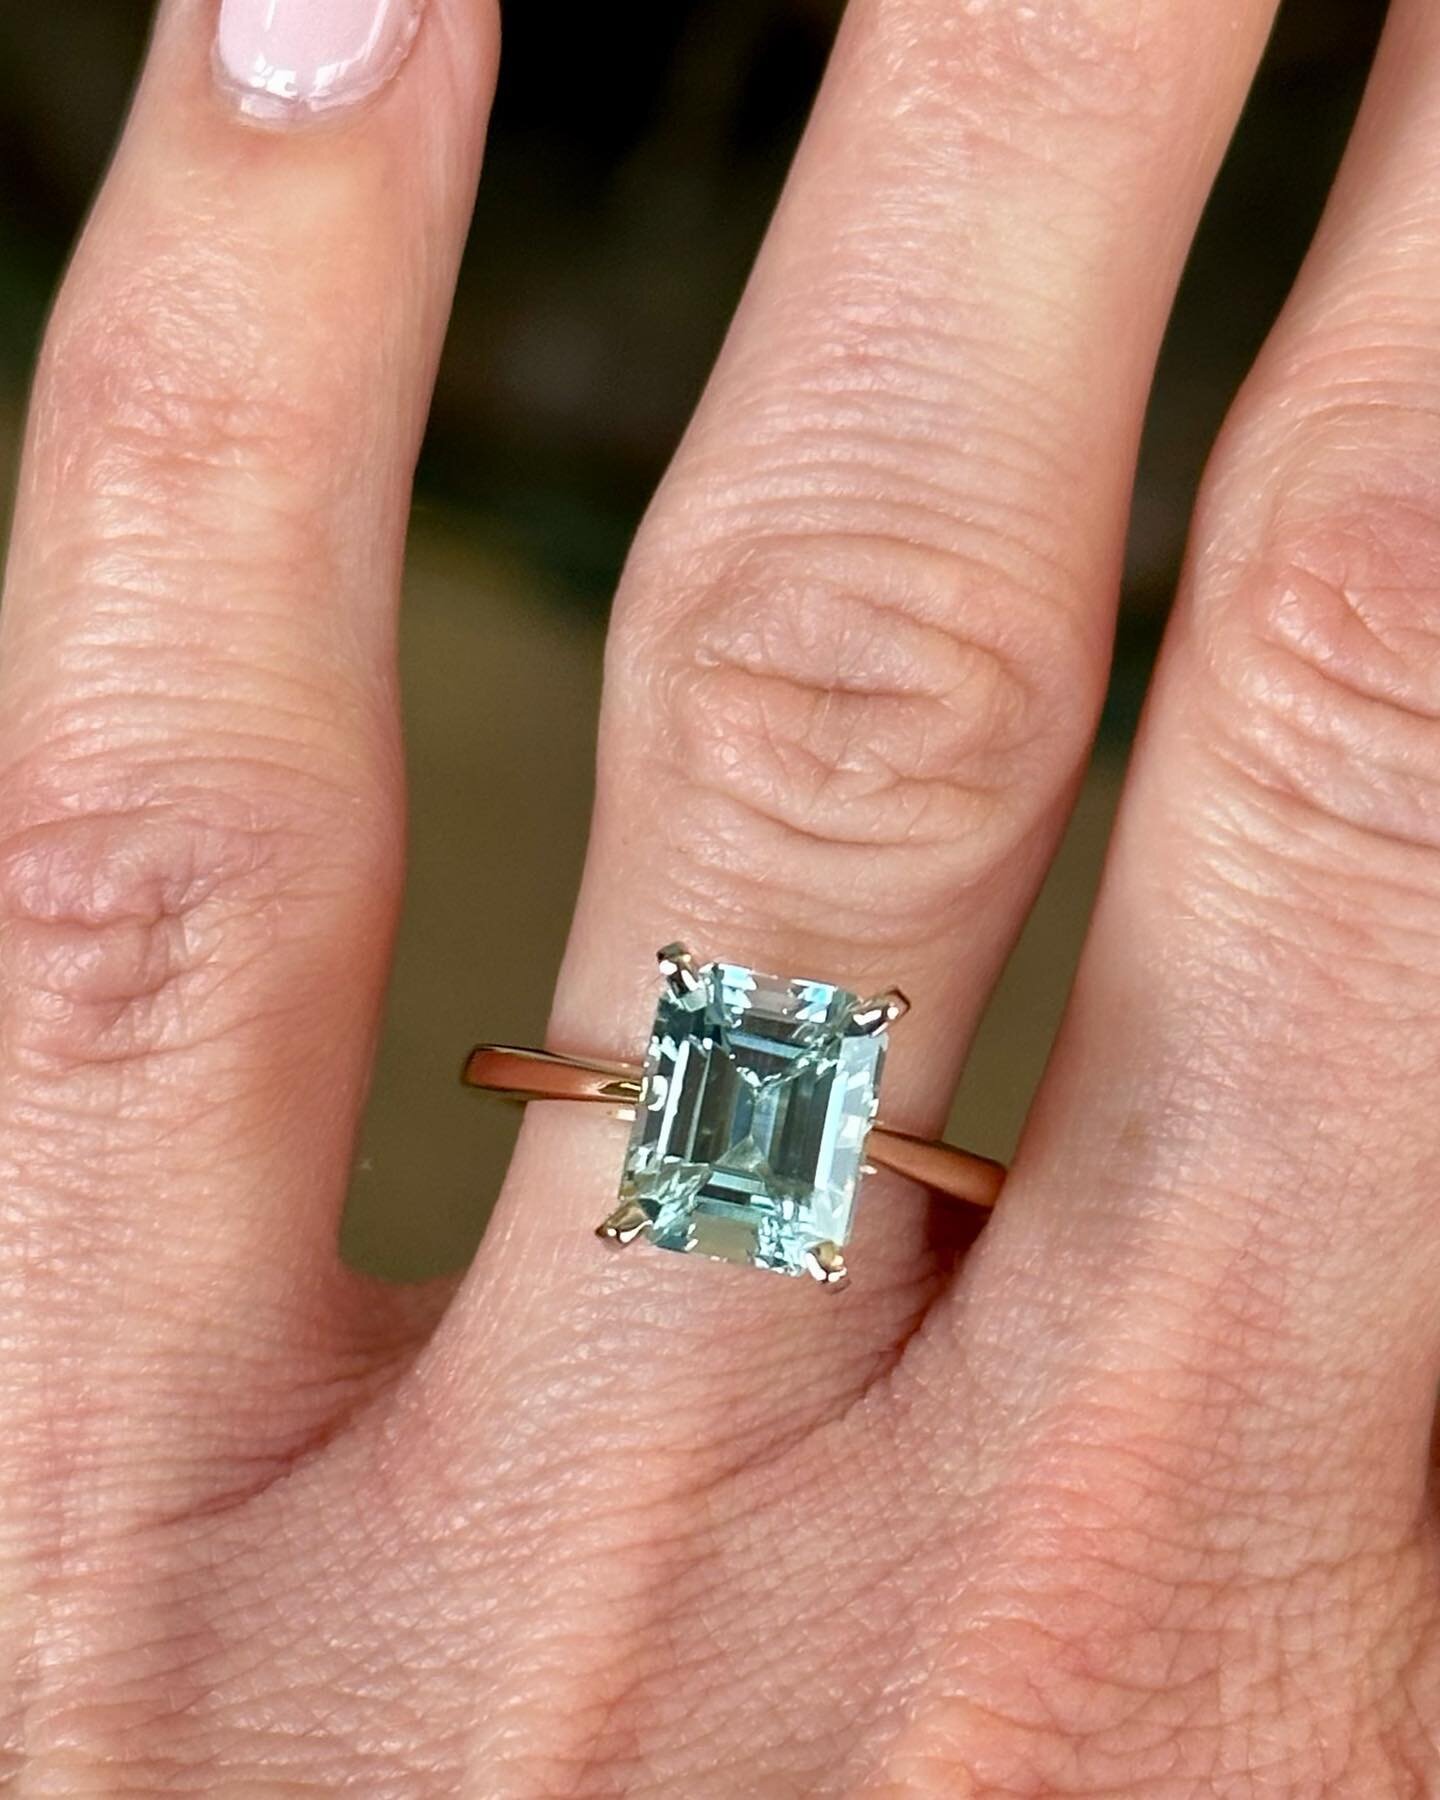 New Custom 3.21ct Aquamarine ring&hellip; just in time for March #marchbirthstone #aquamarine #colorengagementring